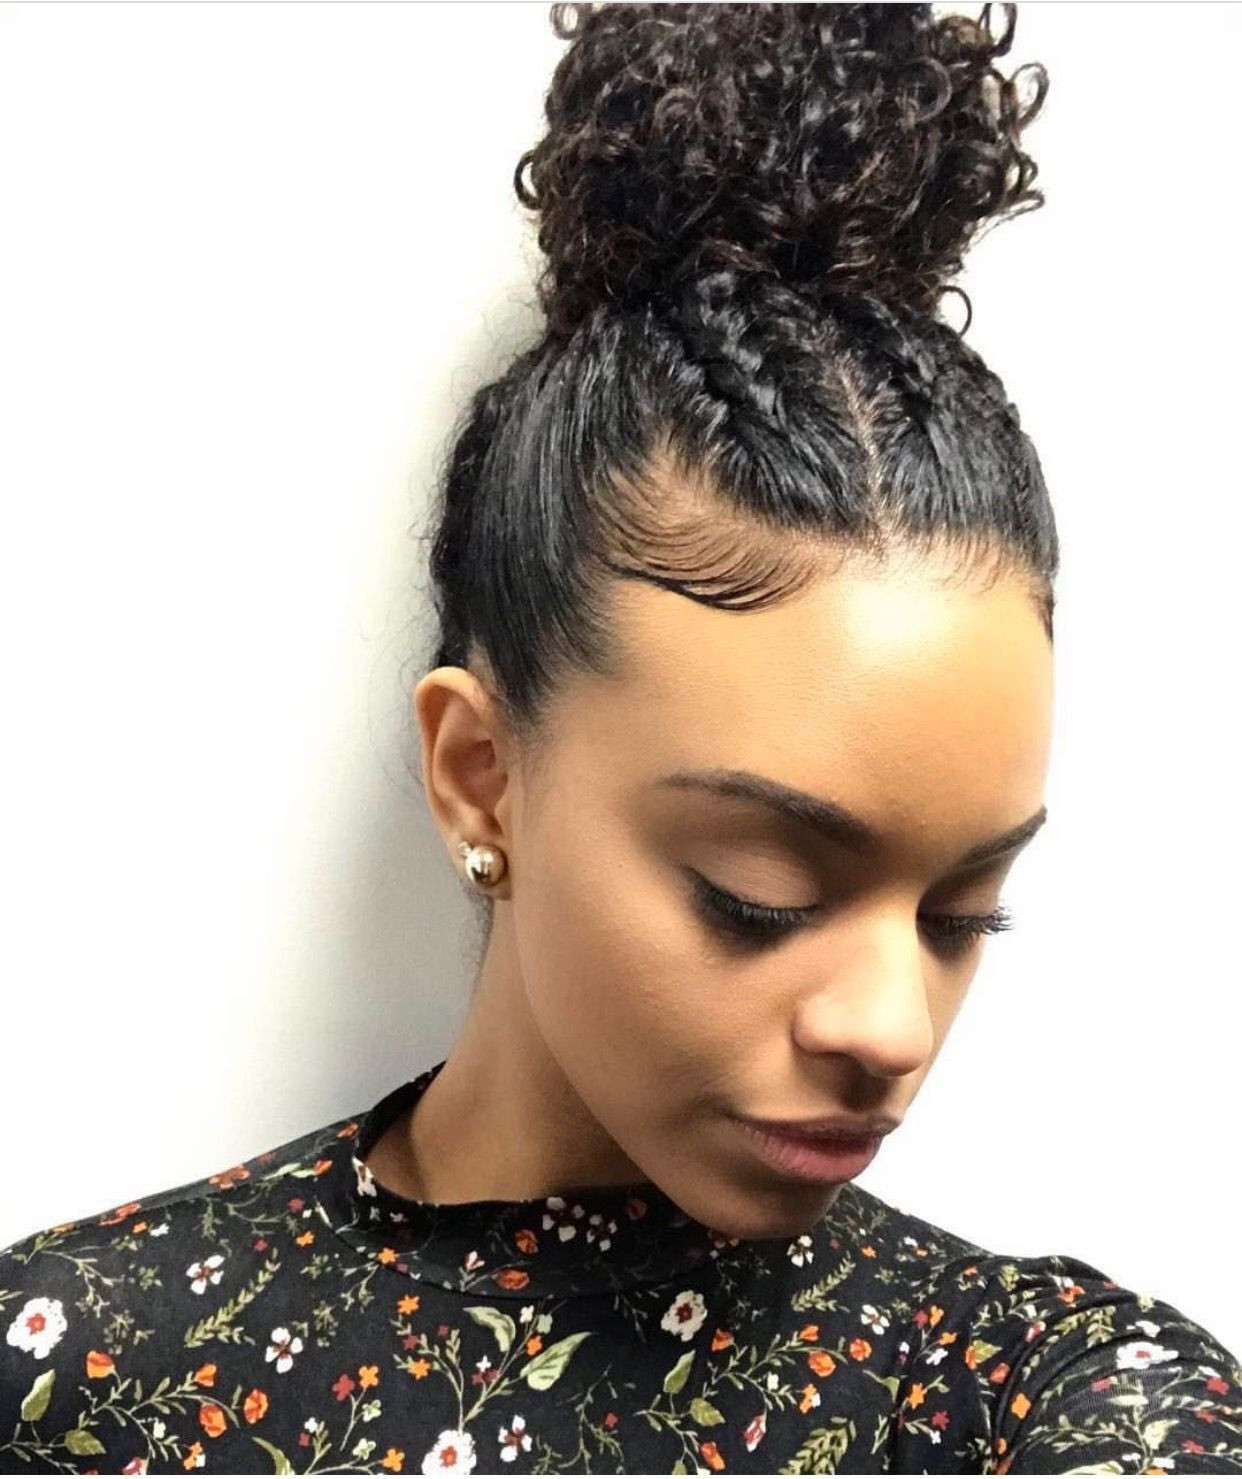 Mixed Girl Short Hairstyles
 Pin by Obsessed Hair on Hair Tips & Hair Care